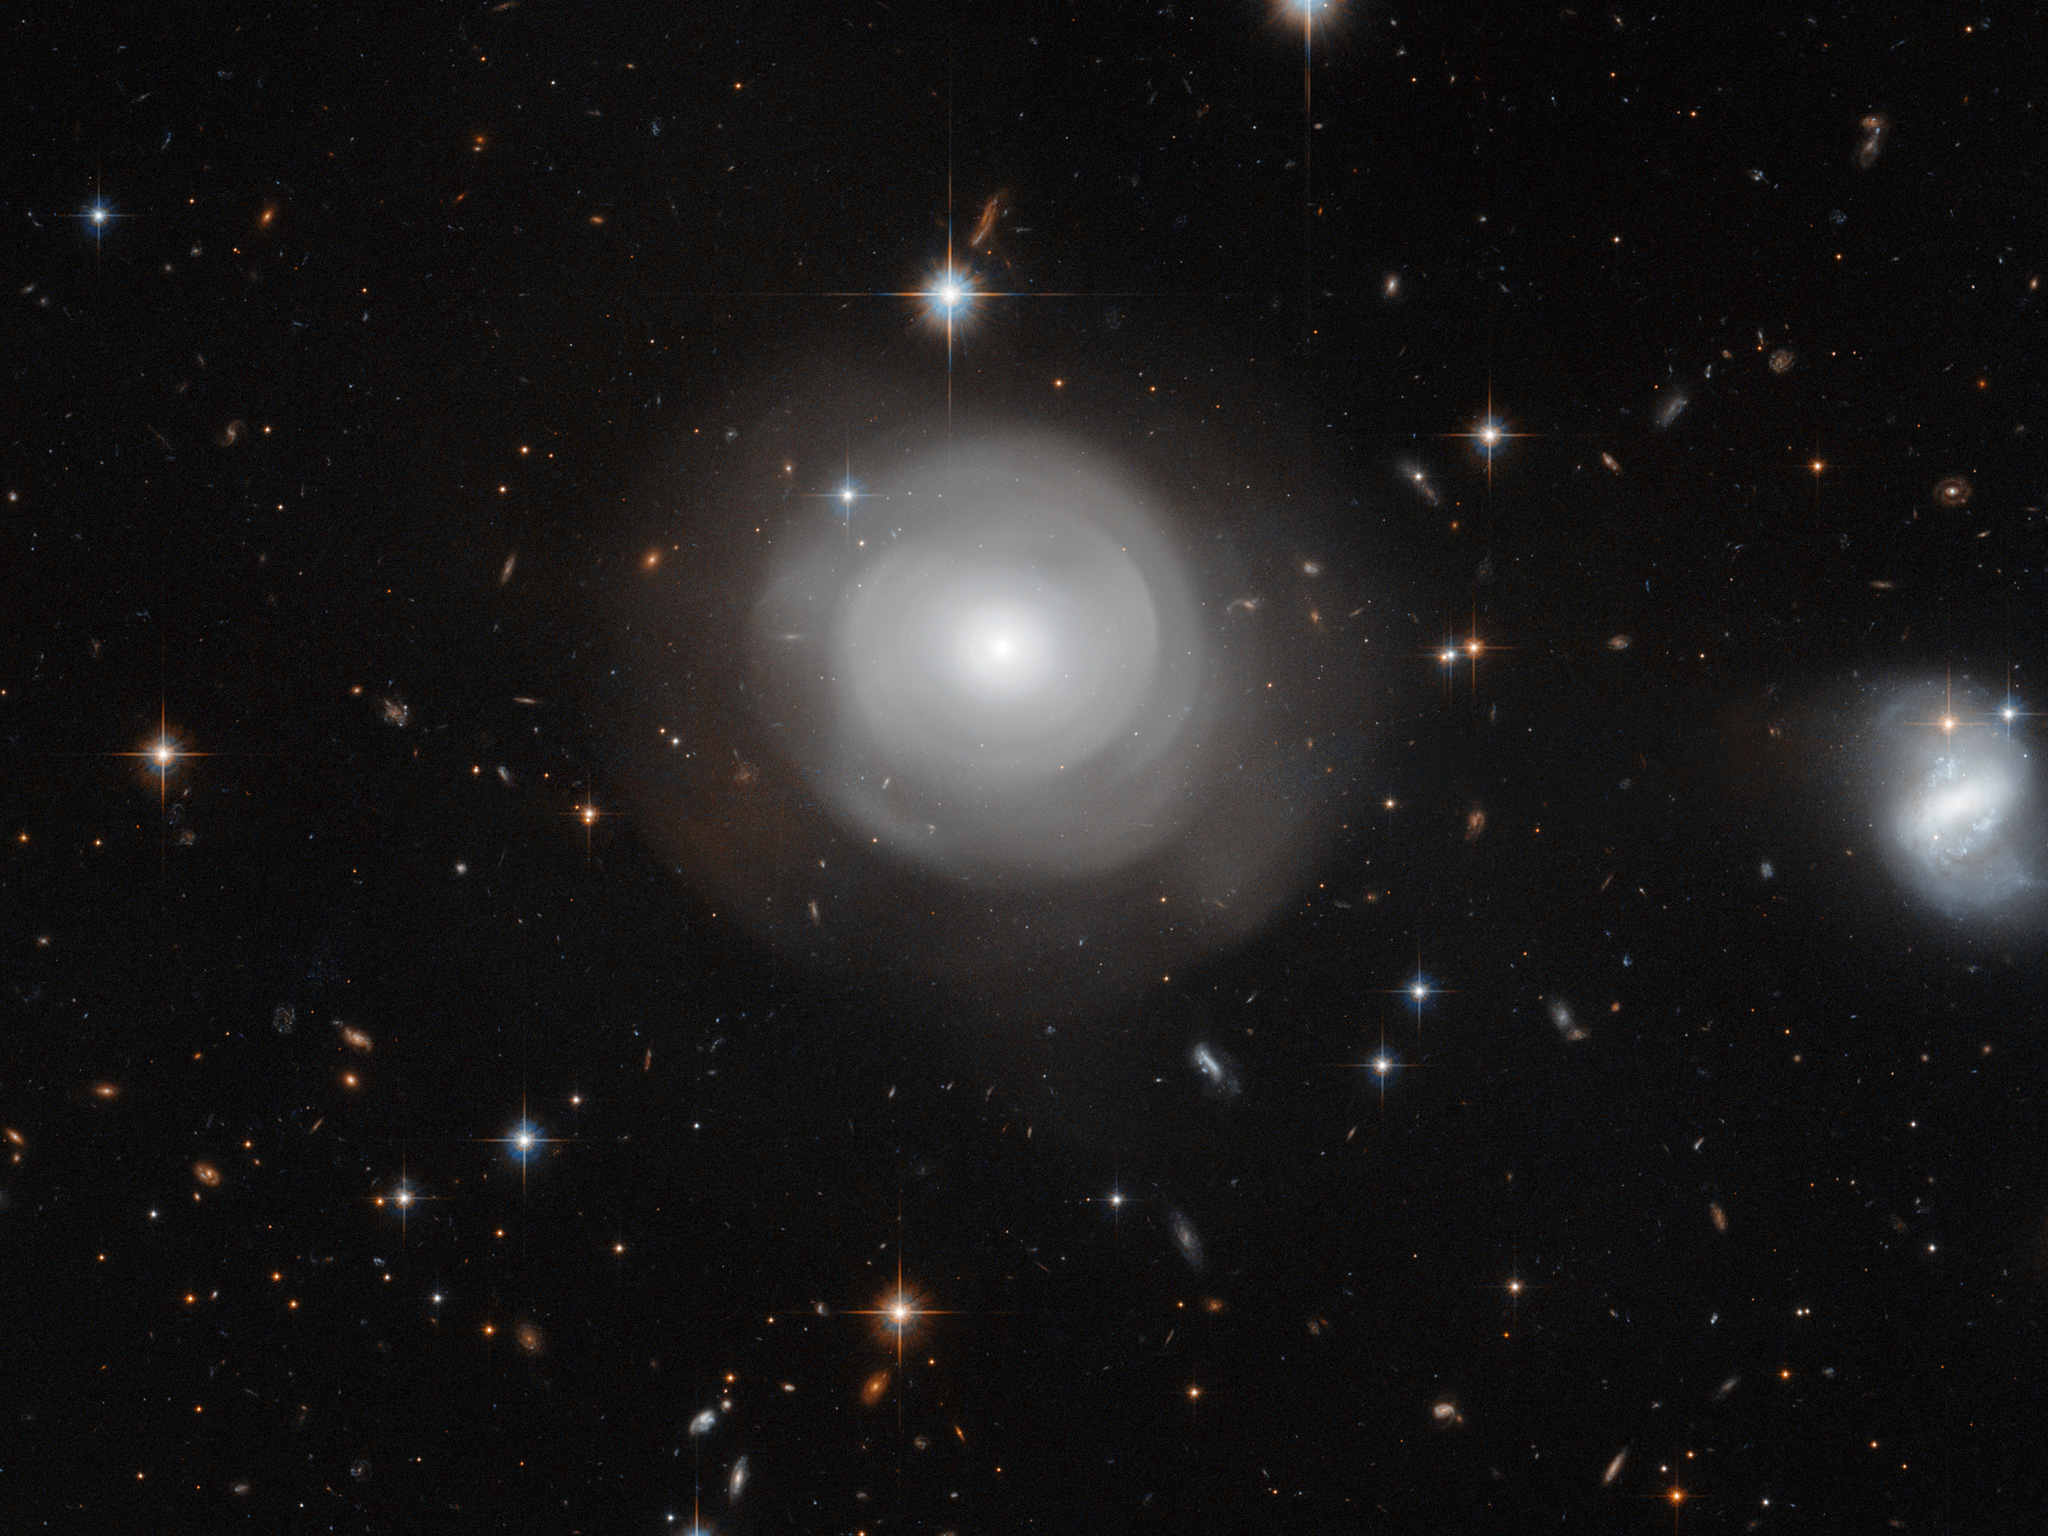 Elliptical galaxy shells the result of collisions.